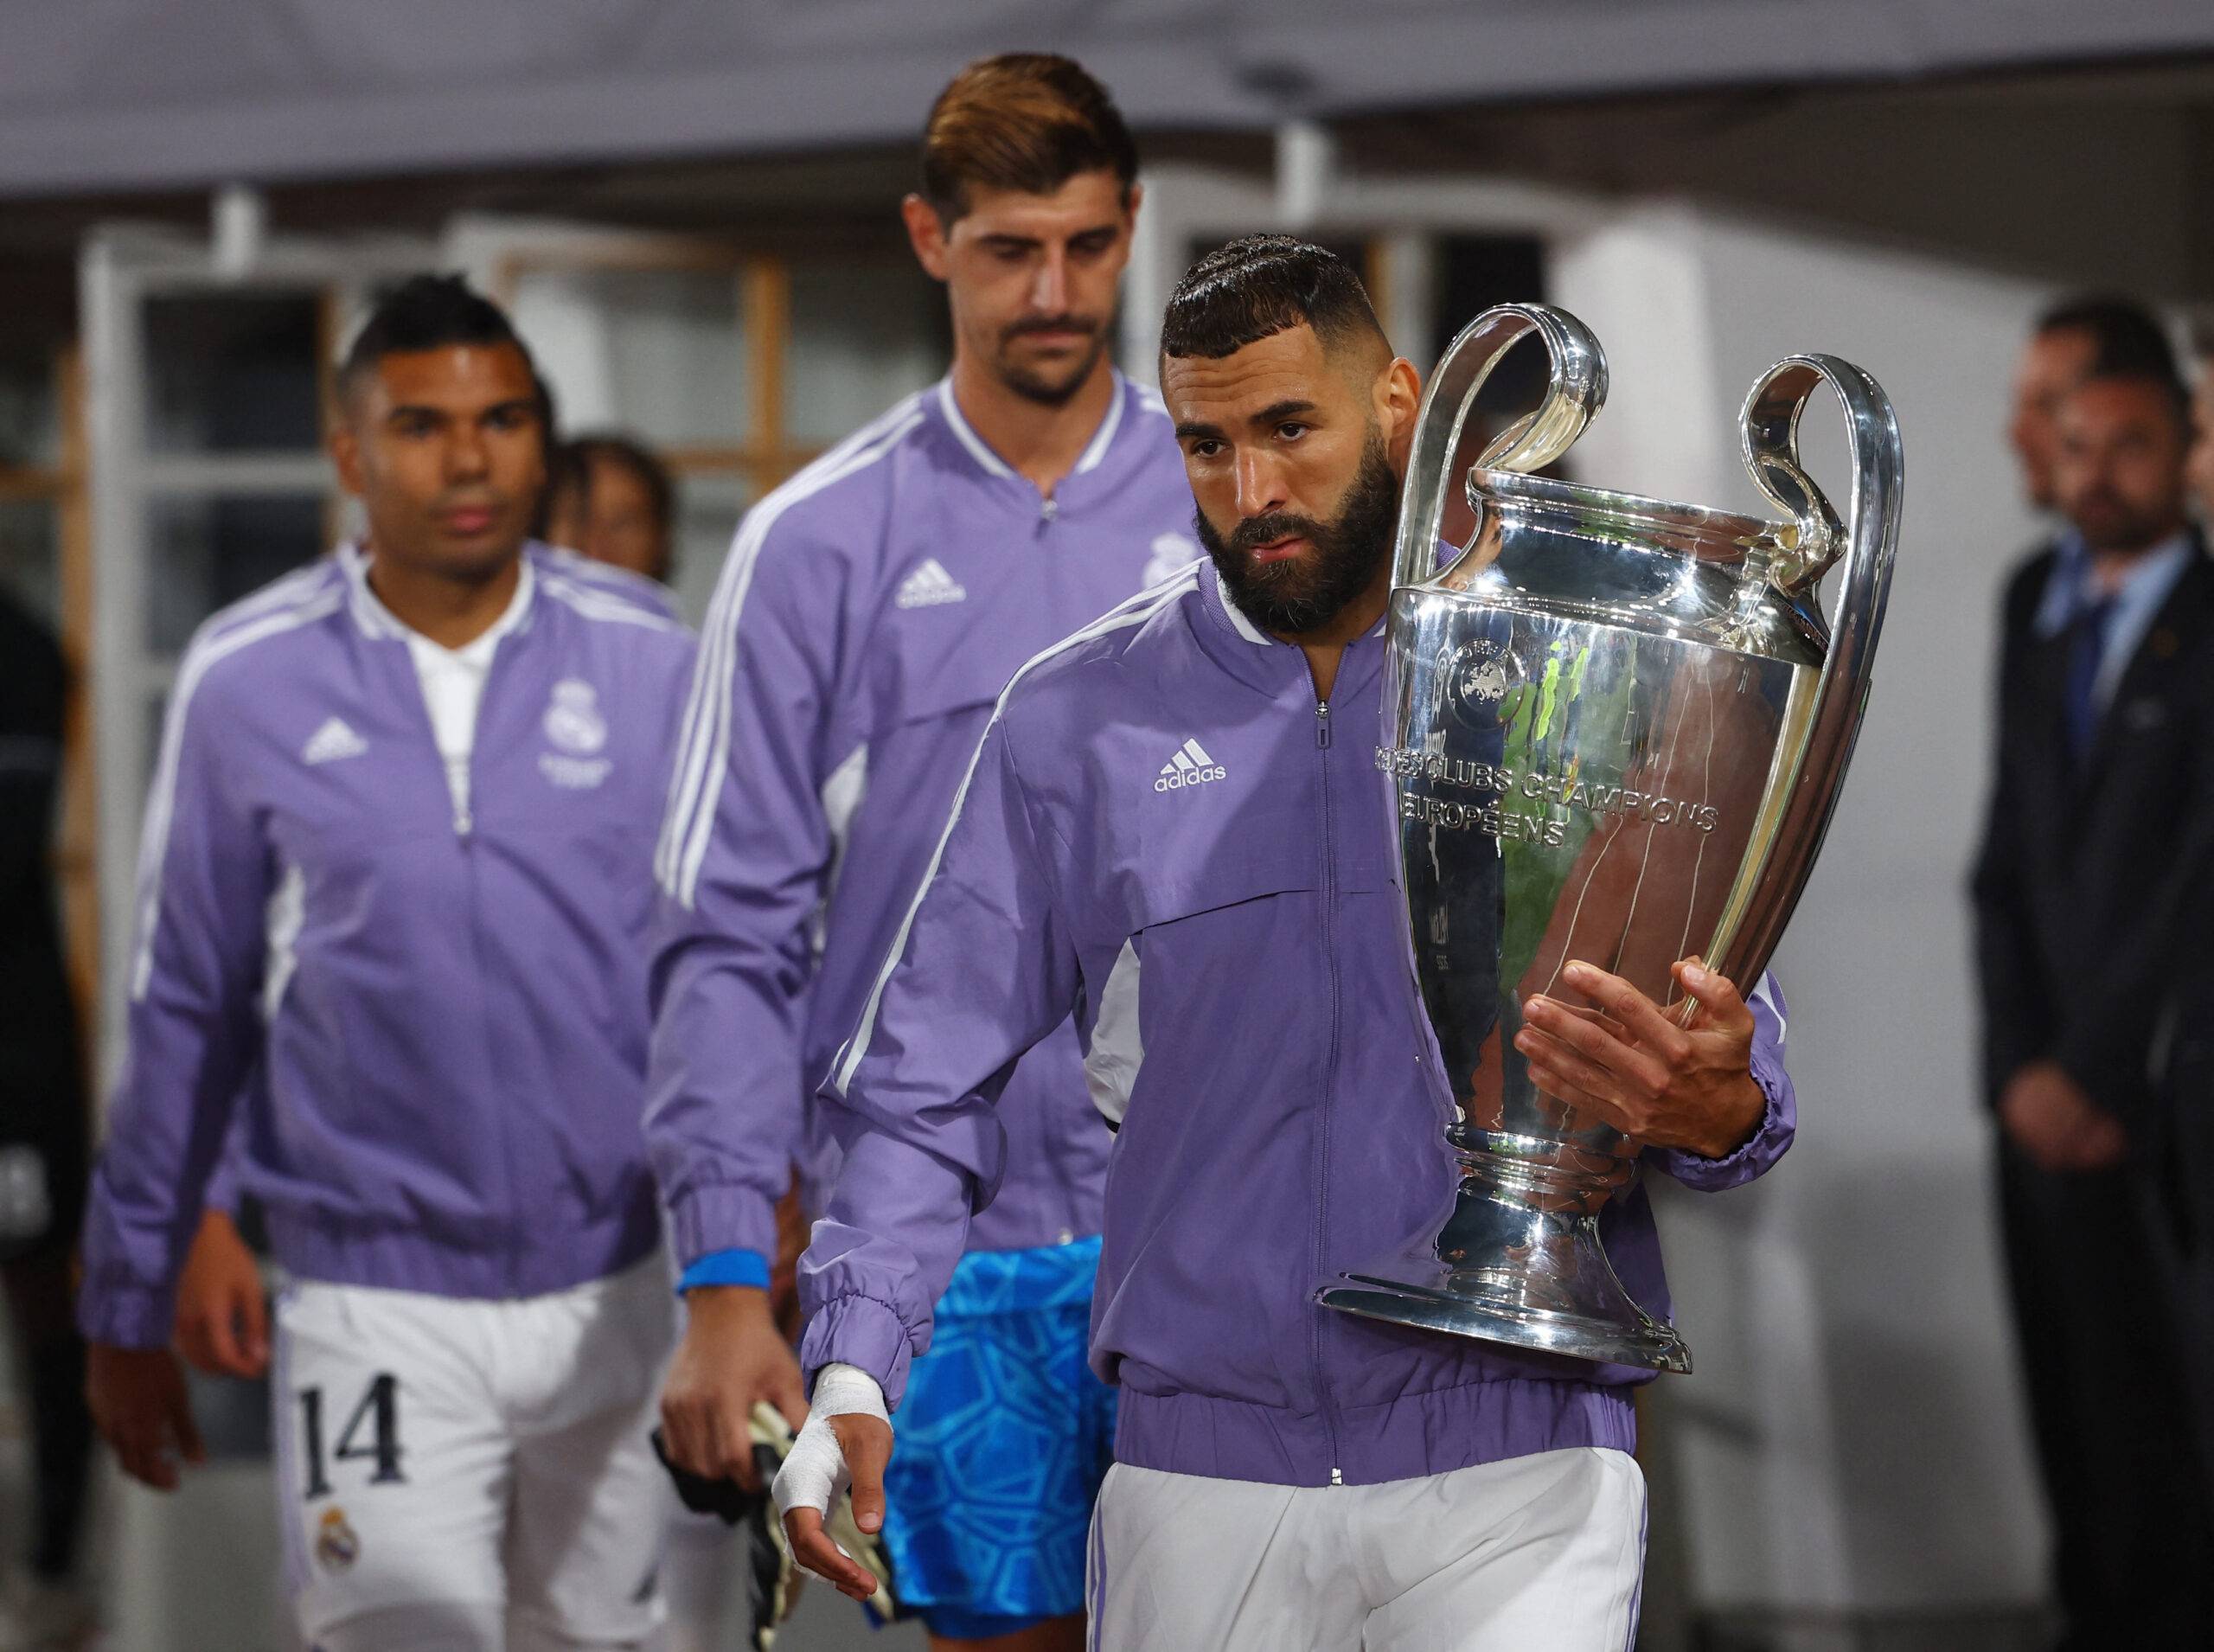 Benzema carrying the Champions League trophy.